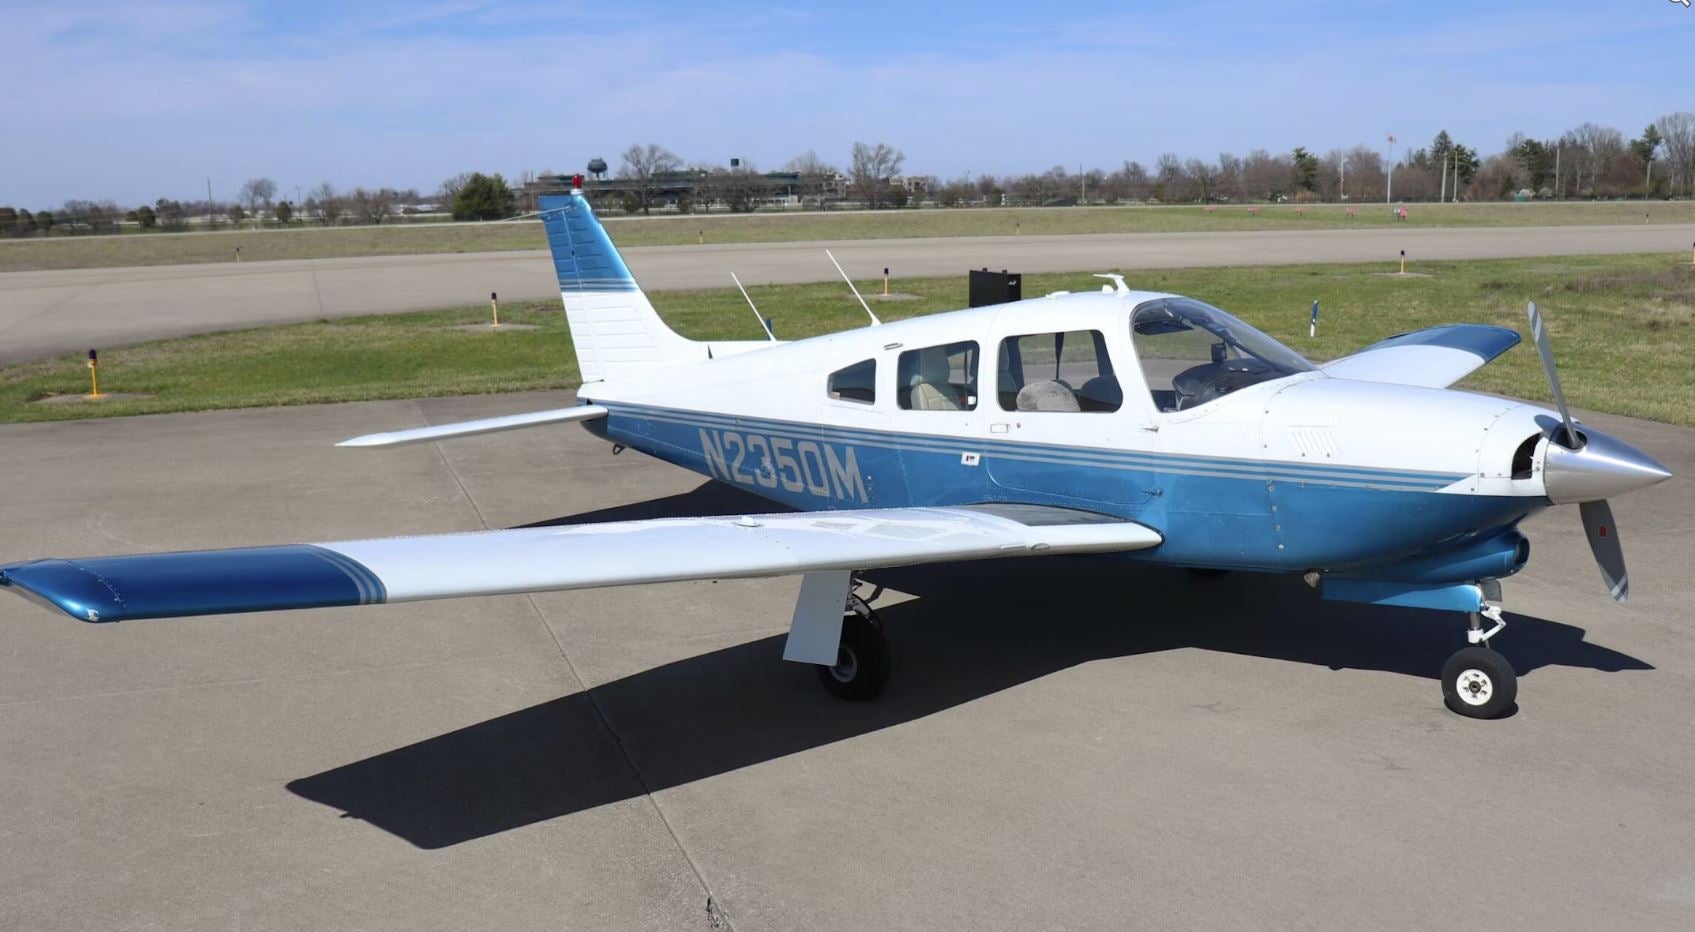 This 1978 Piper PA-28R Turbo Arrow III Is a Faster-Than-Expected ‘AircraftForSale’ Top Pick